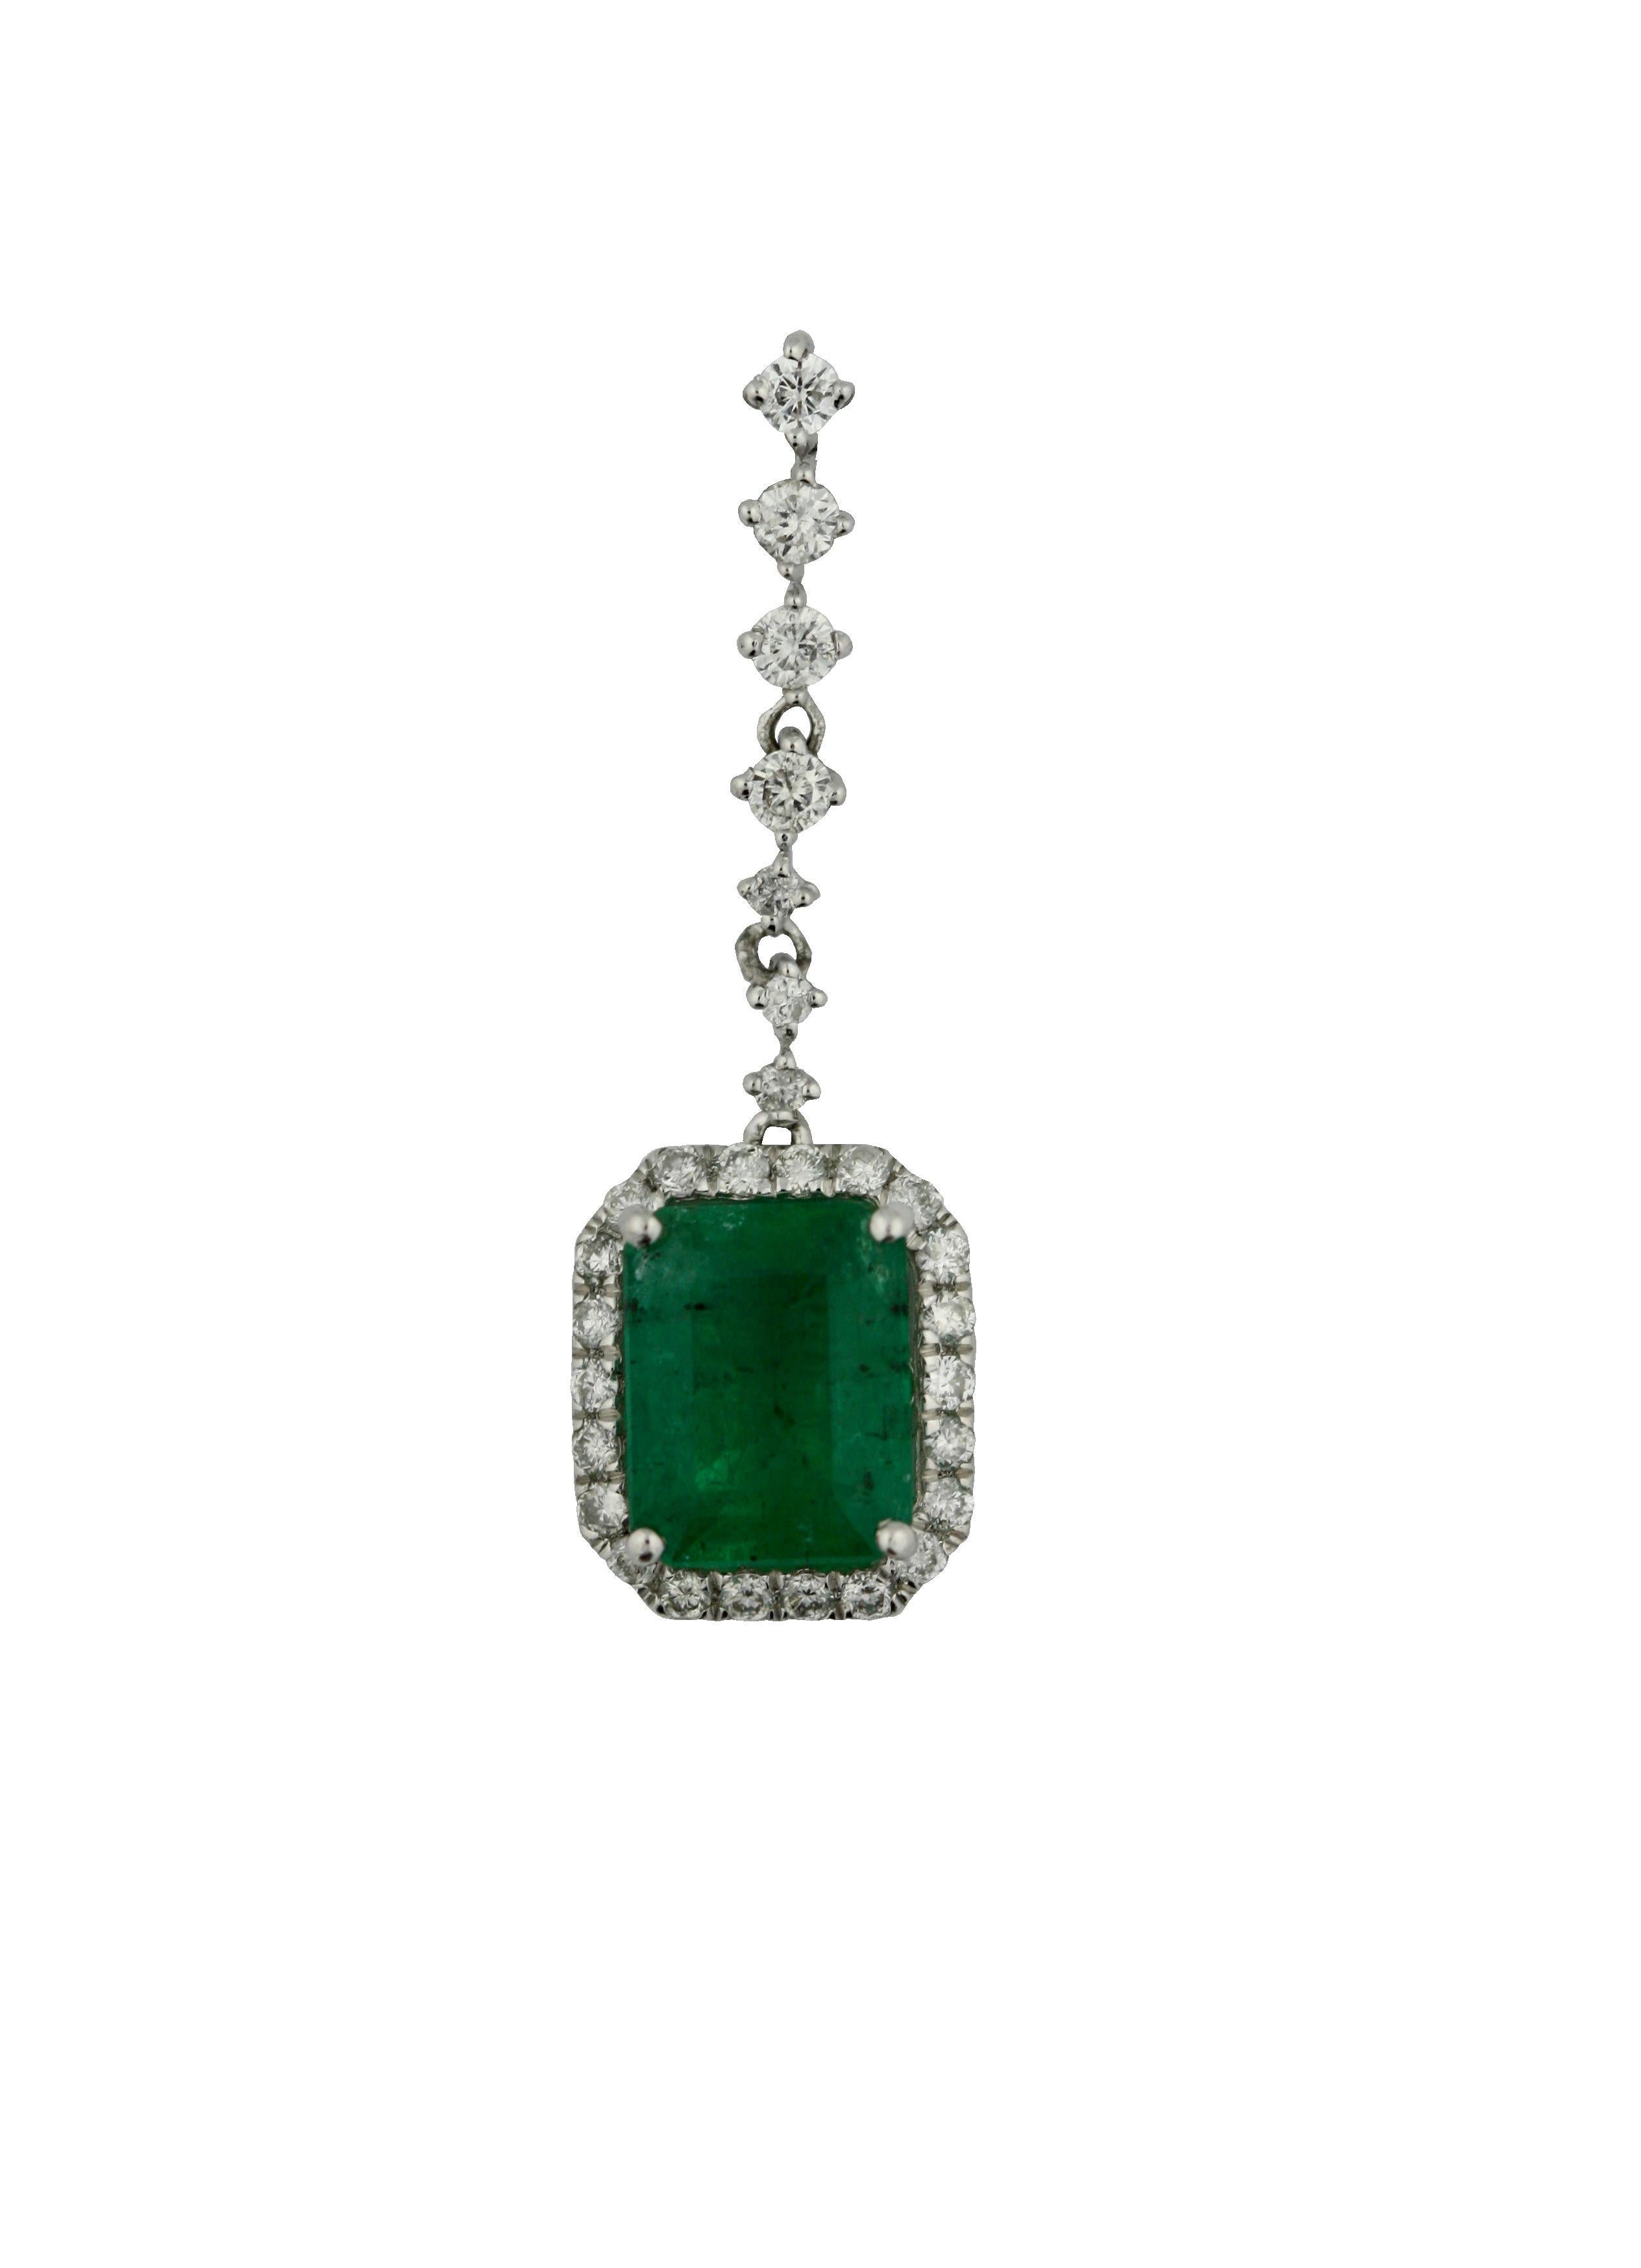 Pair of Emerald and Diamond Earrings
Each of cluster design, each set with a step-cut emerald within a border of circular-cut diamonds, post fittings, emeralds together weighing approximately 3.98 carats, diamonds weighing a total of approximately